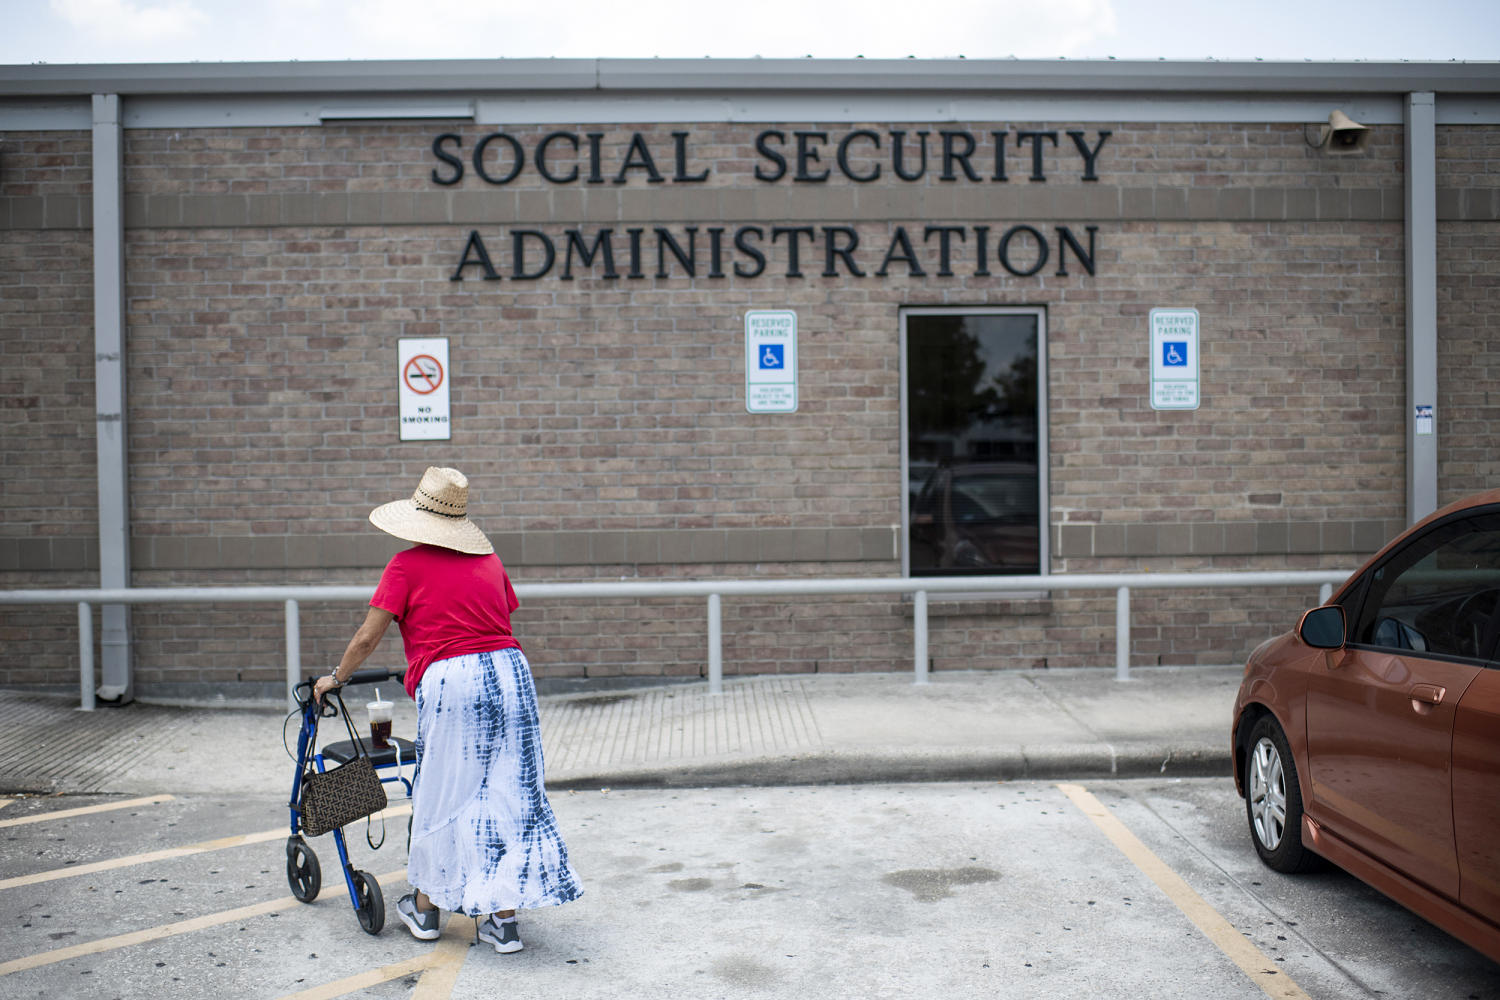 Social Security Administration will no longer count food aid as income for poor recipients